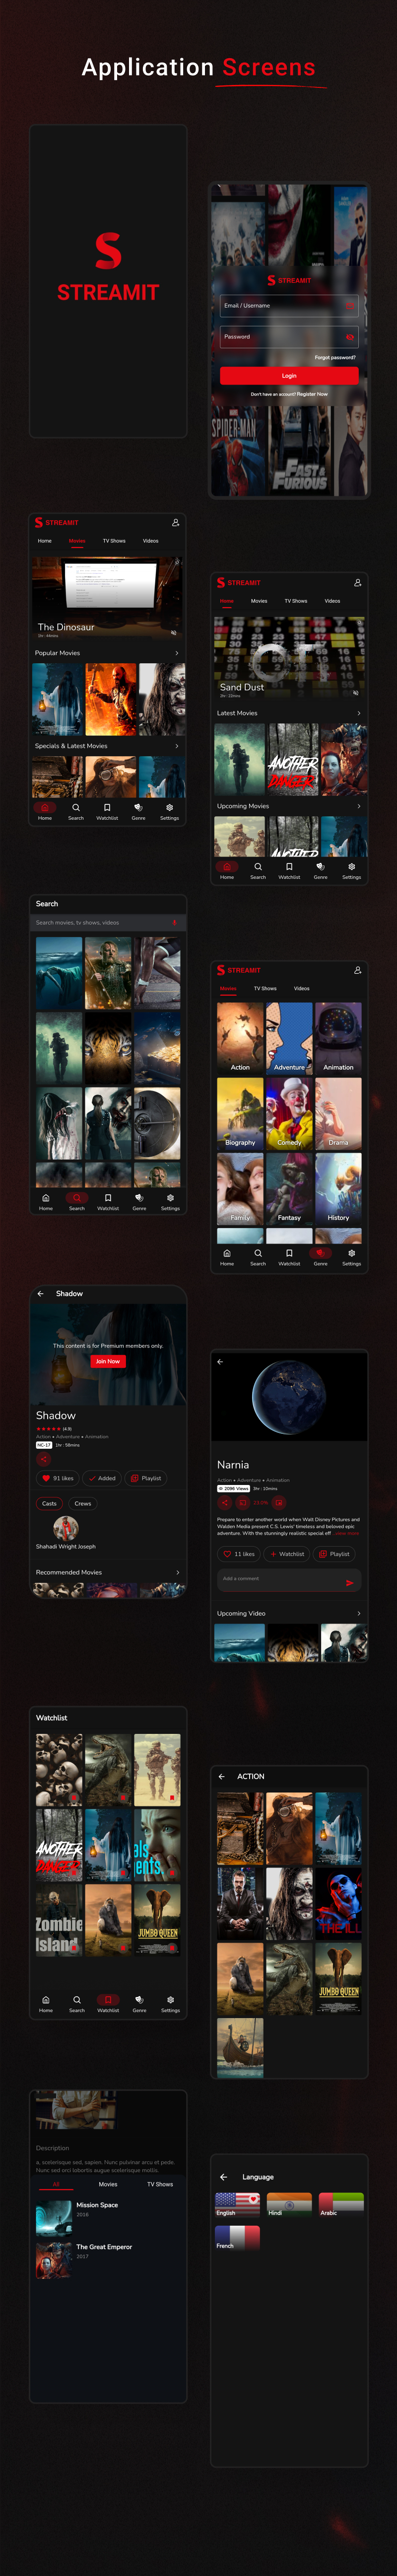 Streamit - Movie, TV Show, Video Streaming Flutter App With WordPress Backend - 1